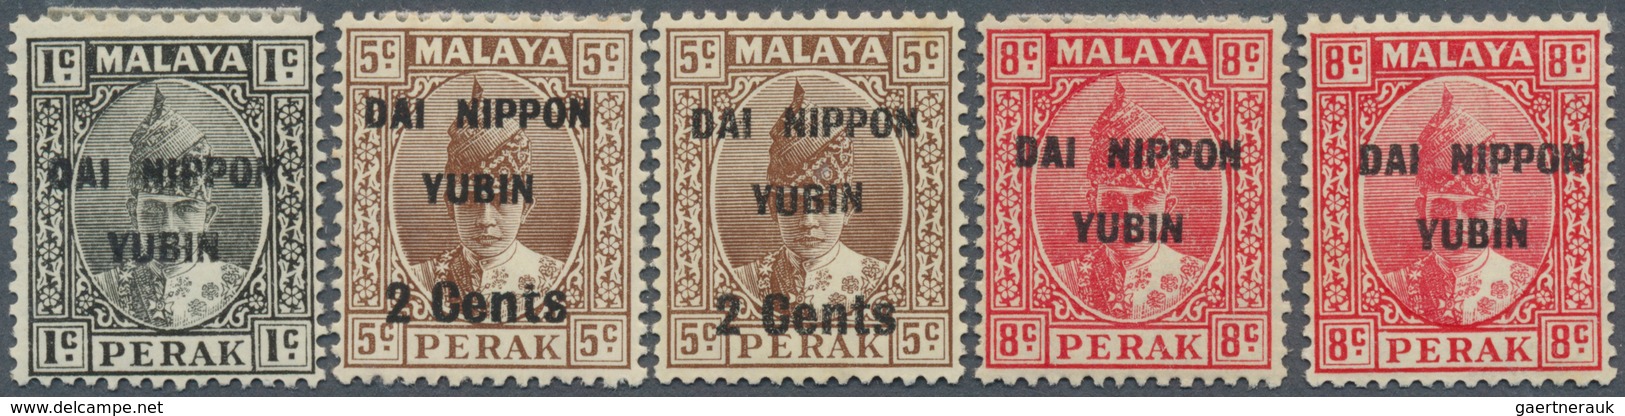 Japanische Besetzung  WK II - Malaya: General Issues, Perak, 1942, Ovpt. T17 Used Inc. Inverts On 1 - Malaysia (1964-...)